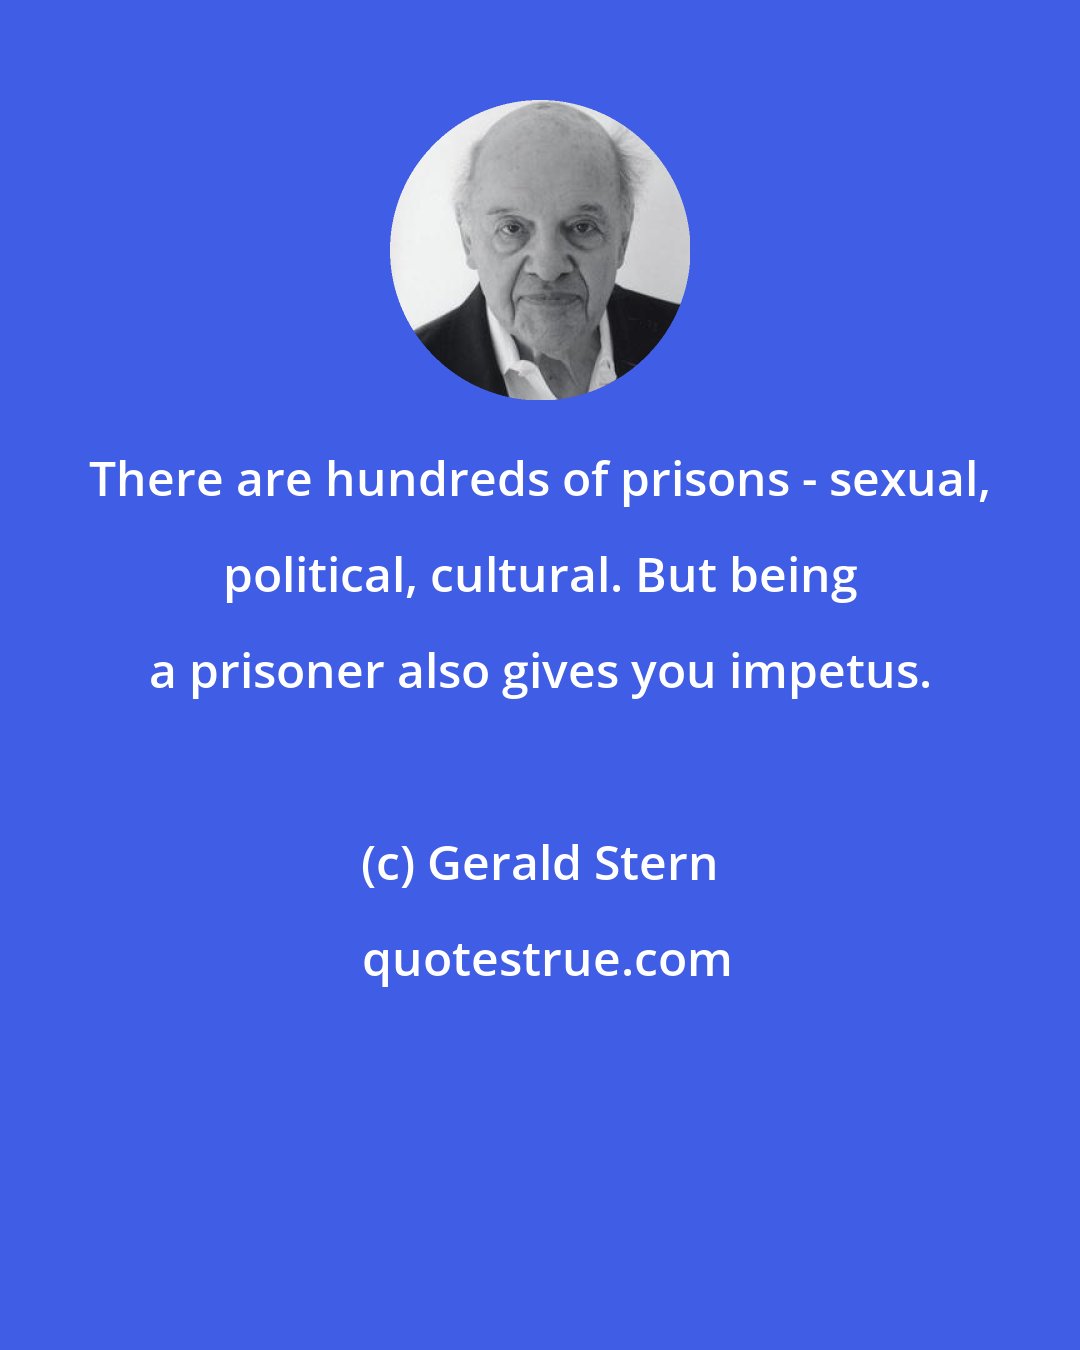 Gerald Stern: There are hundreds of prisons - sexual, political, cultural. But being a prisoner also gives you impetus.